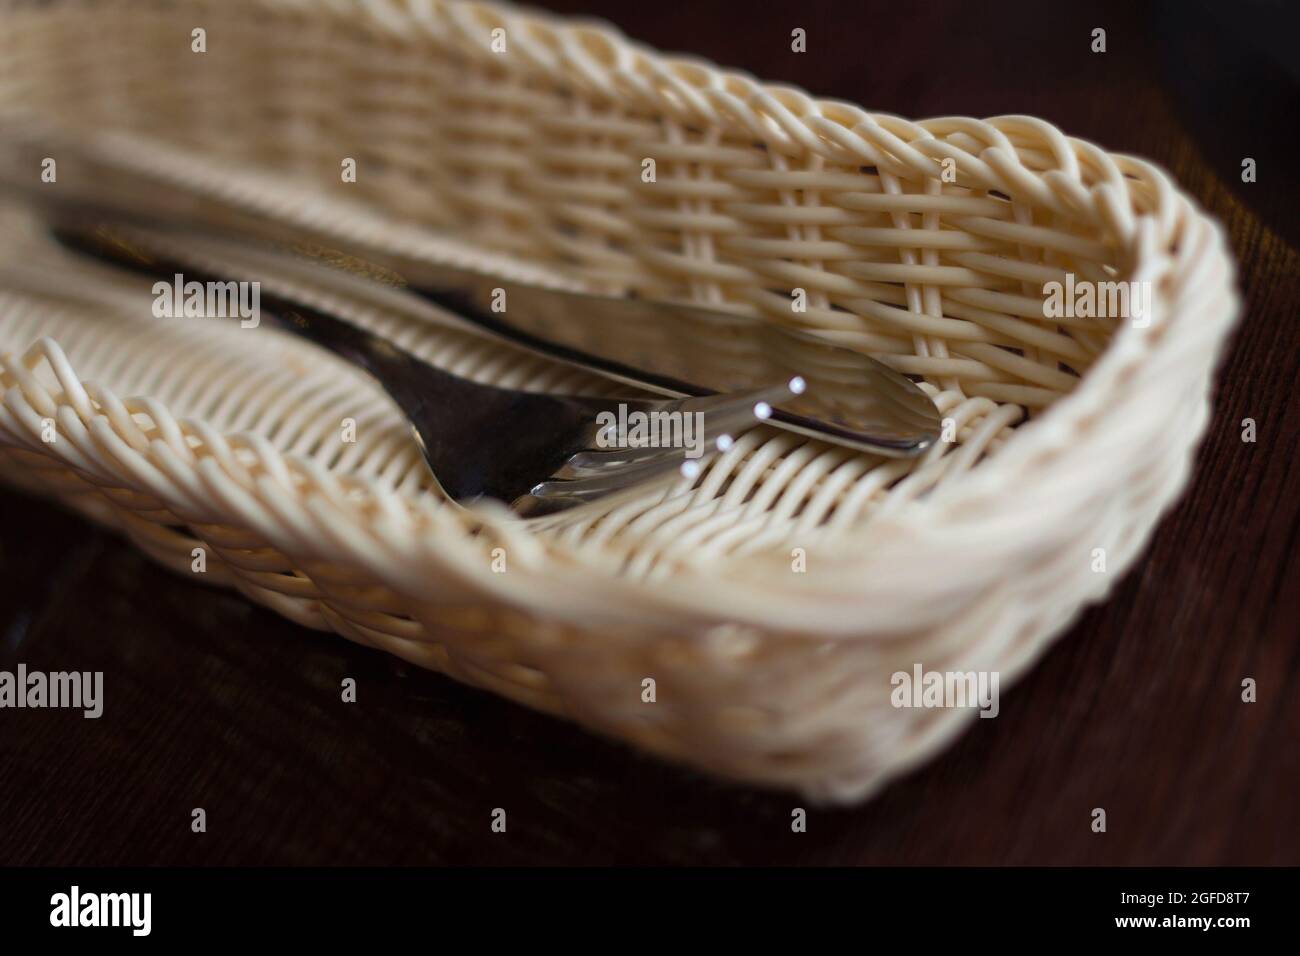 Knife and fork in a basket on a table Stock Photo